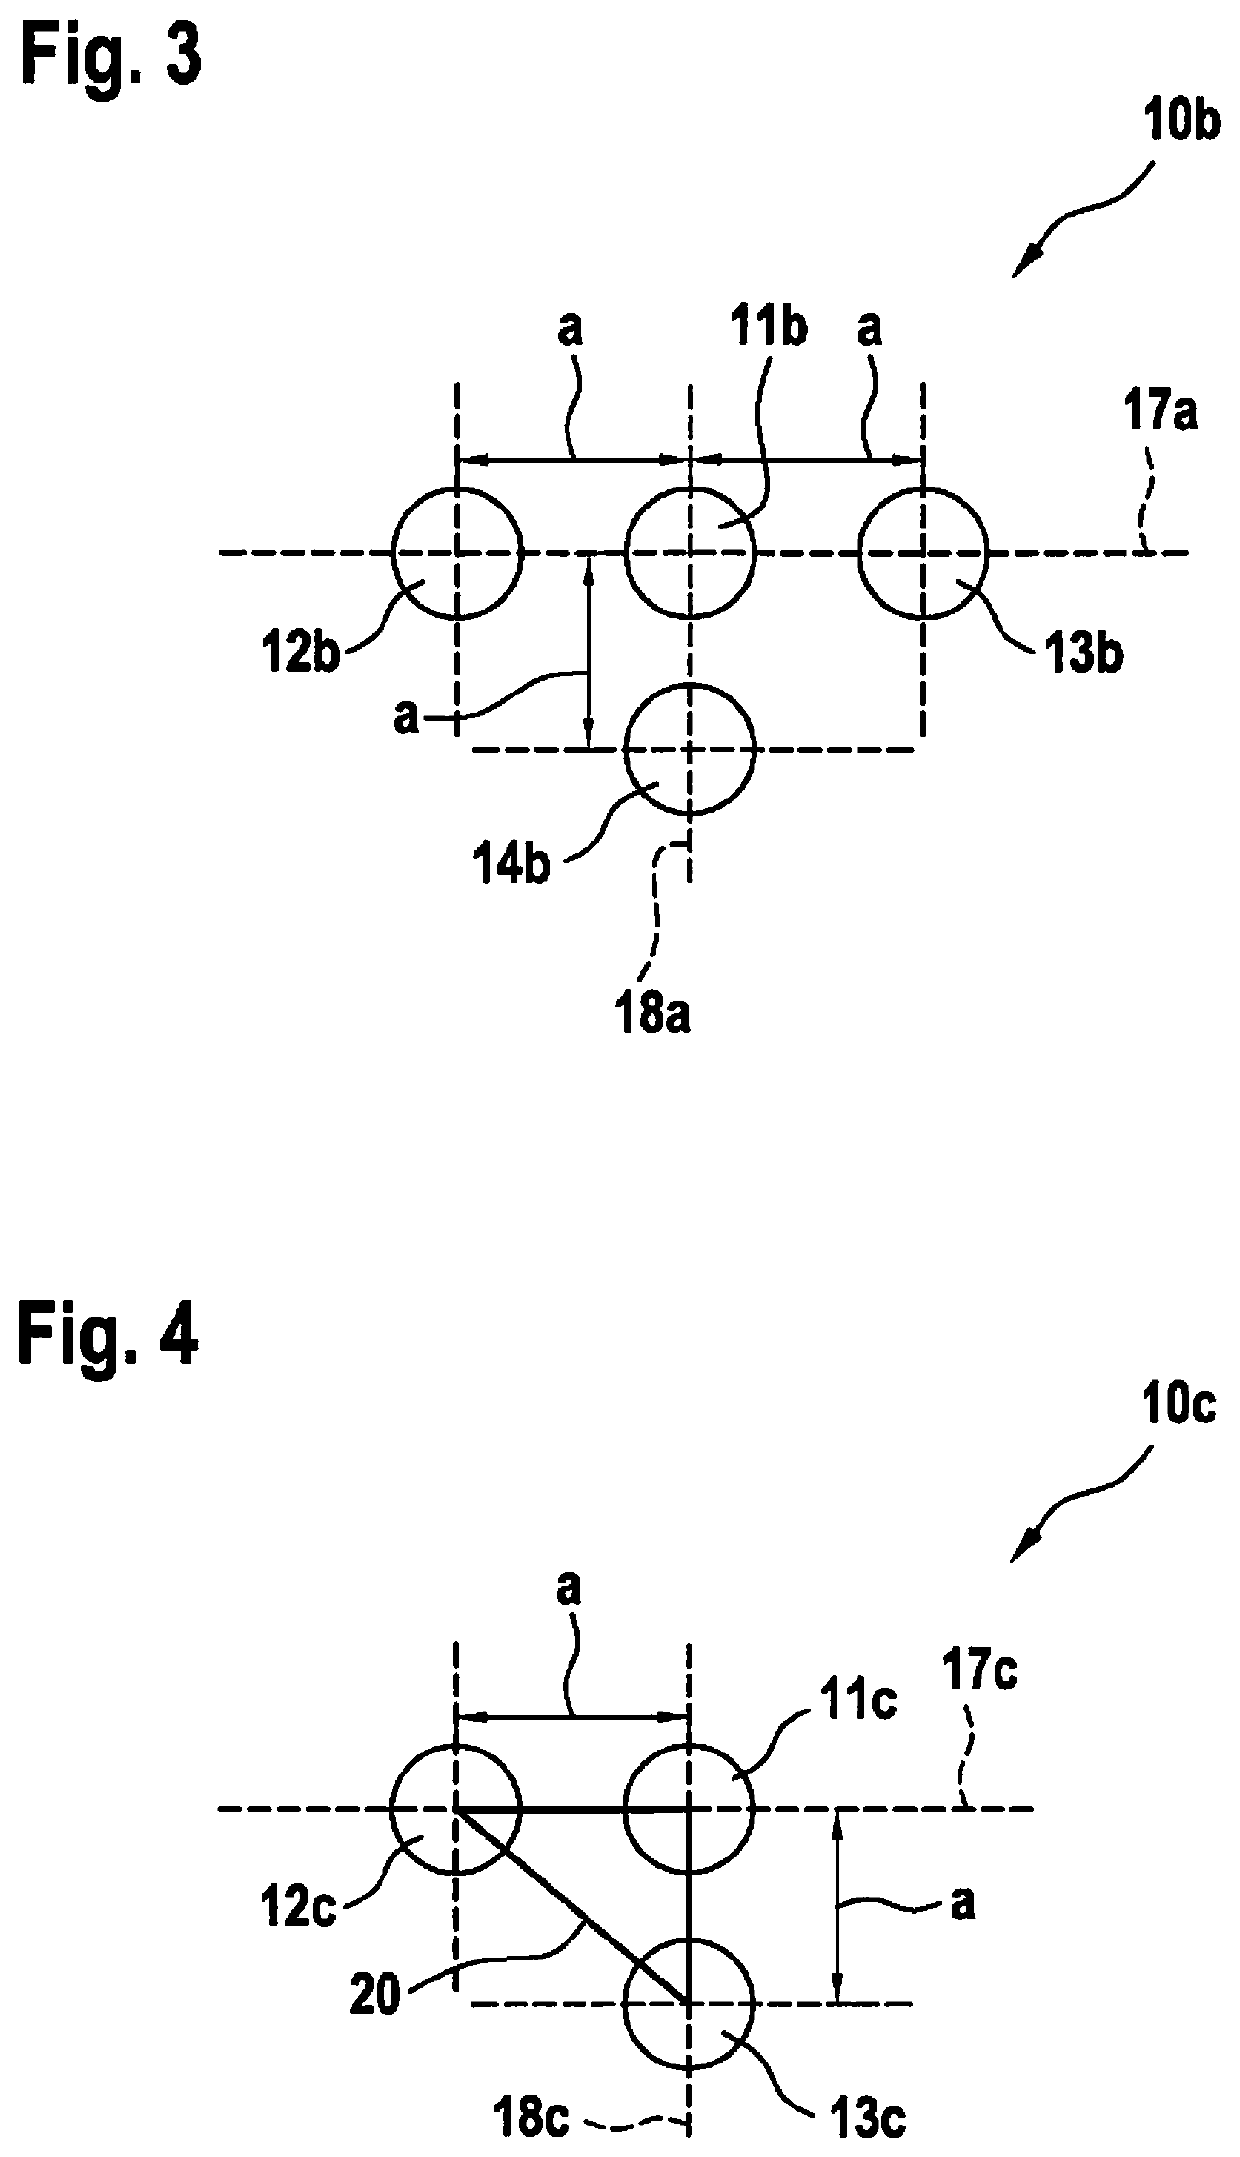 Method for calibrating ultrasonic transducers and system for carrying out the method